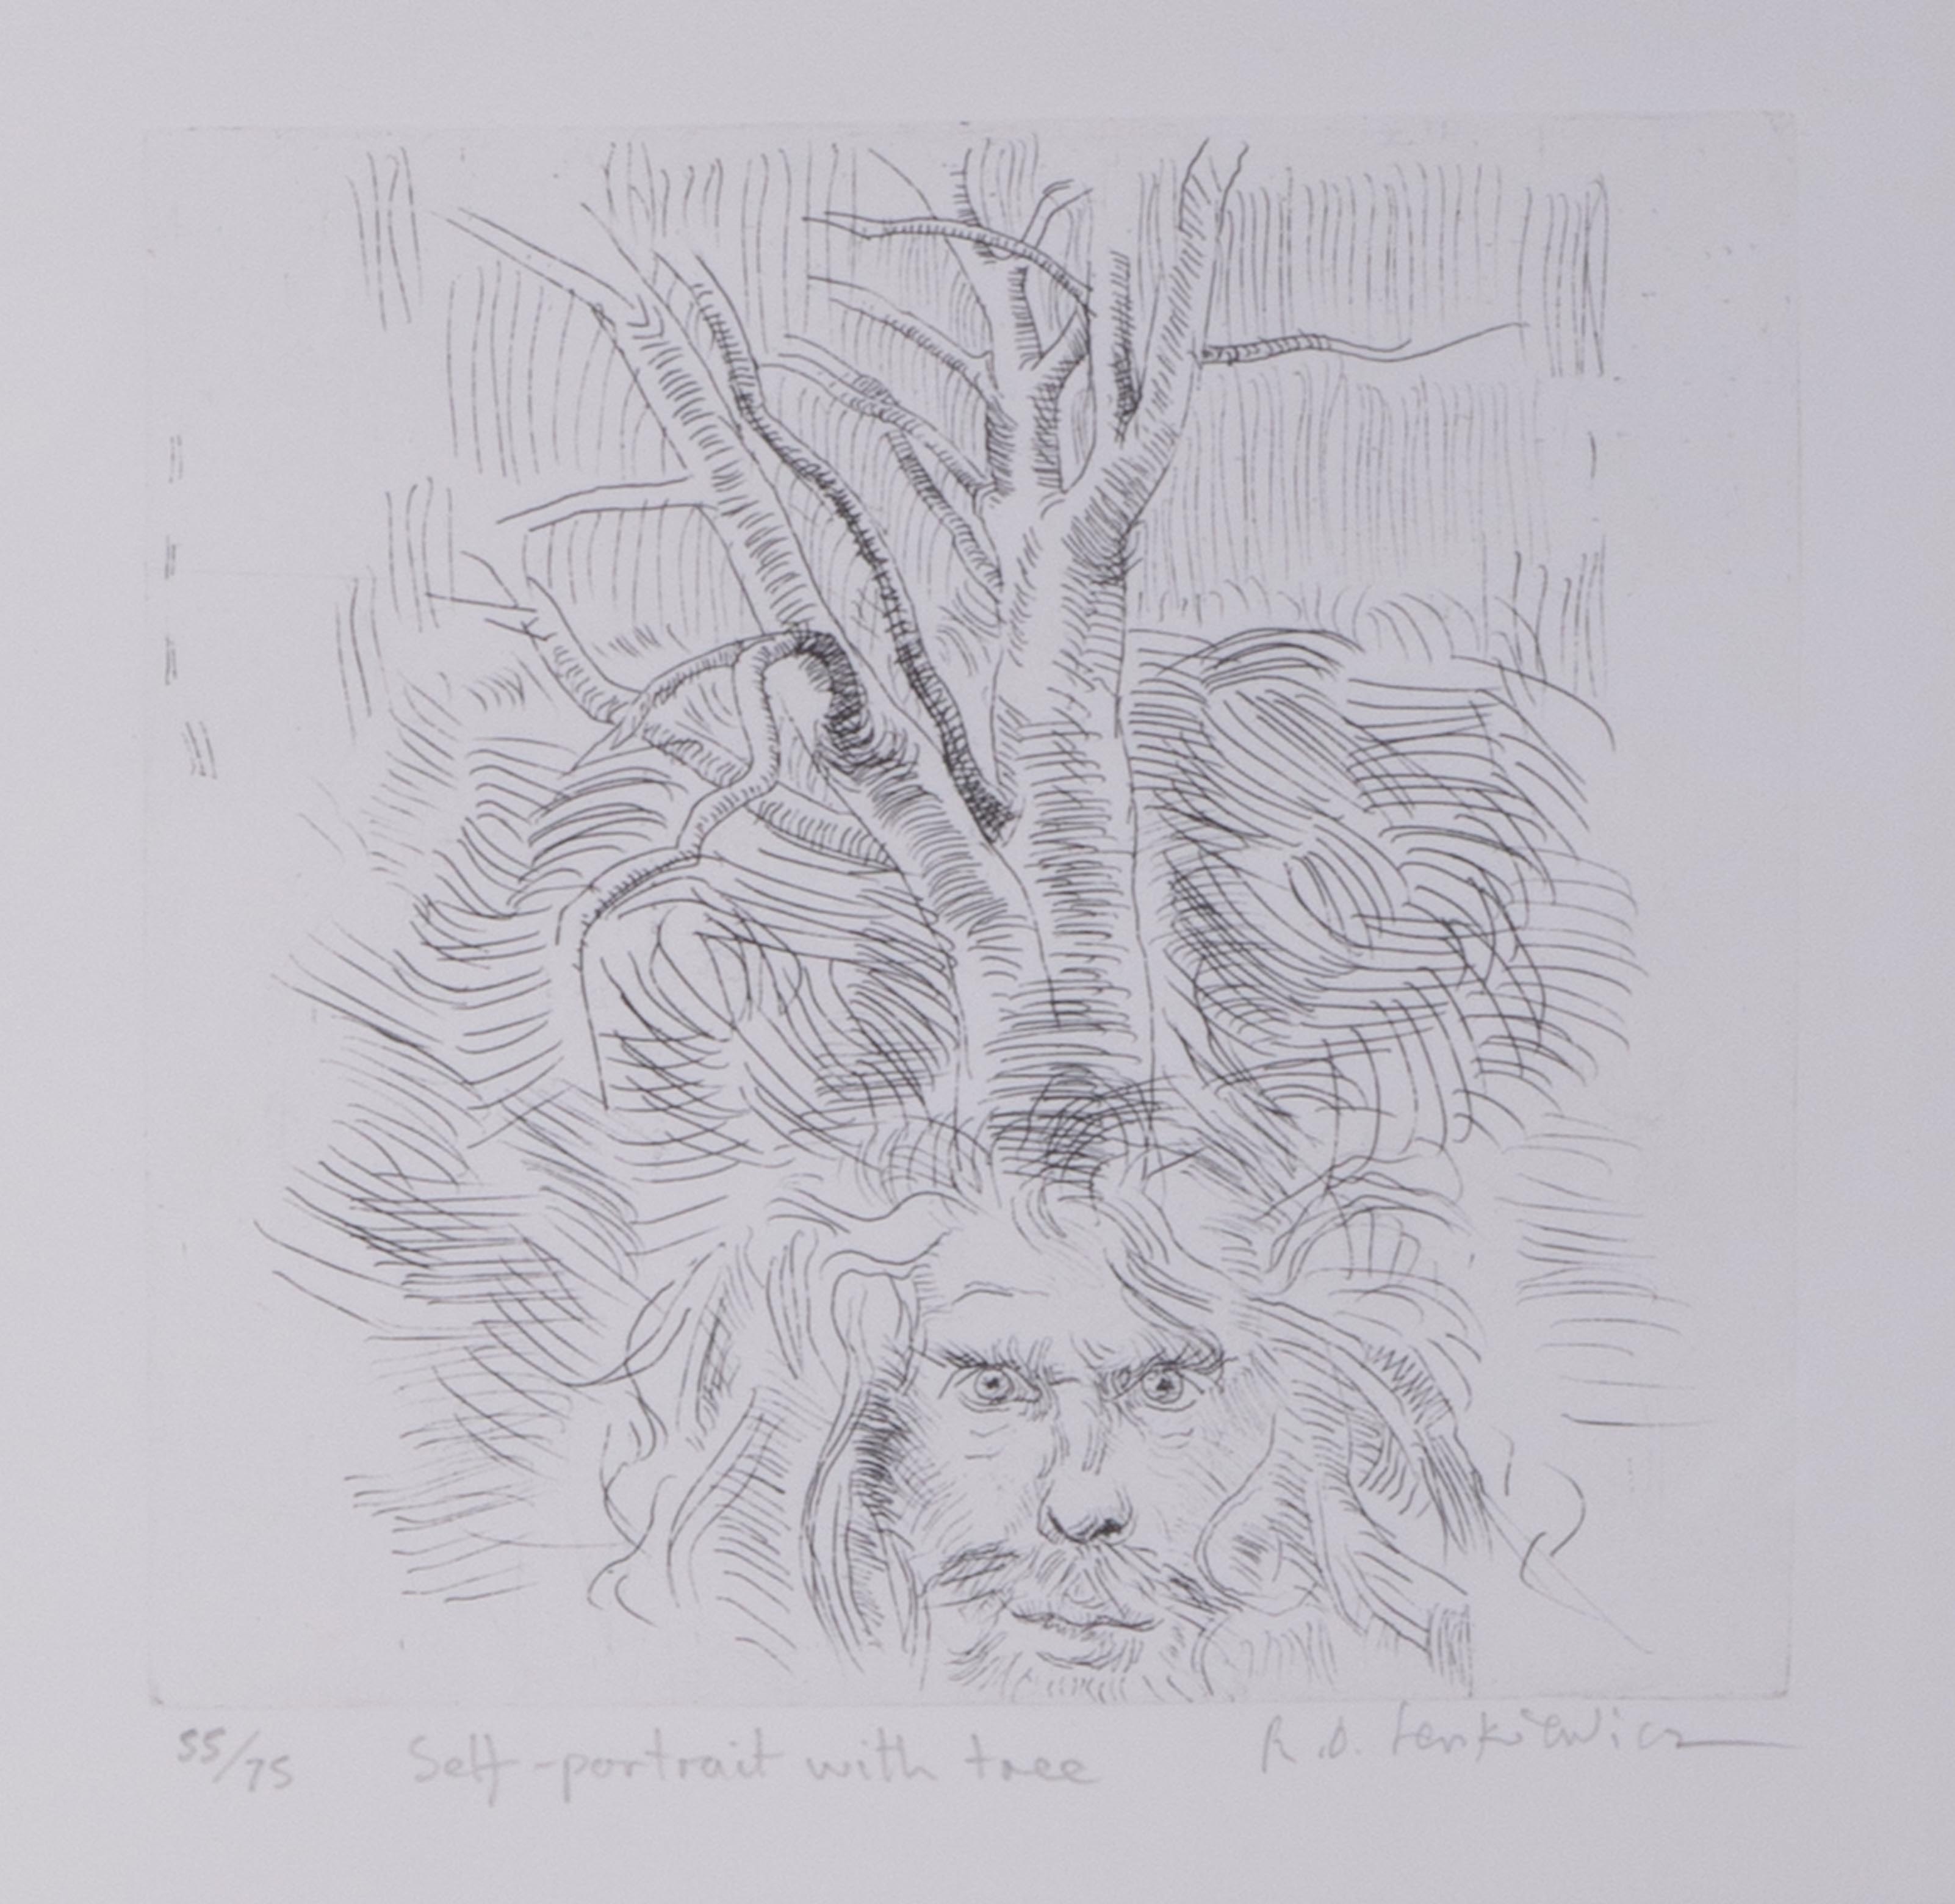 Robert Lenkiewicz (1941-2002), etching, titled Self portrait with tree, signed edition 55 of 75 in - Image 2 of 2